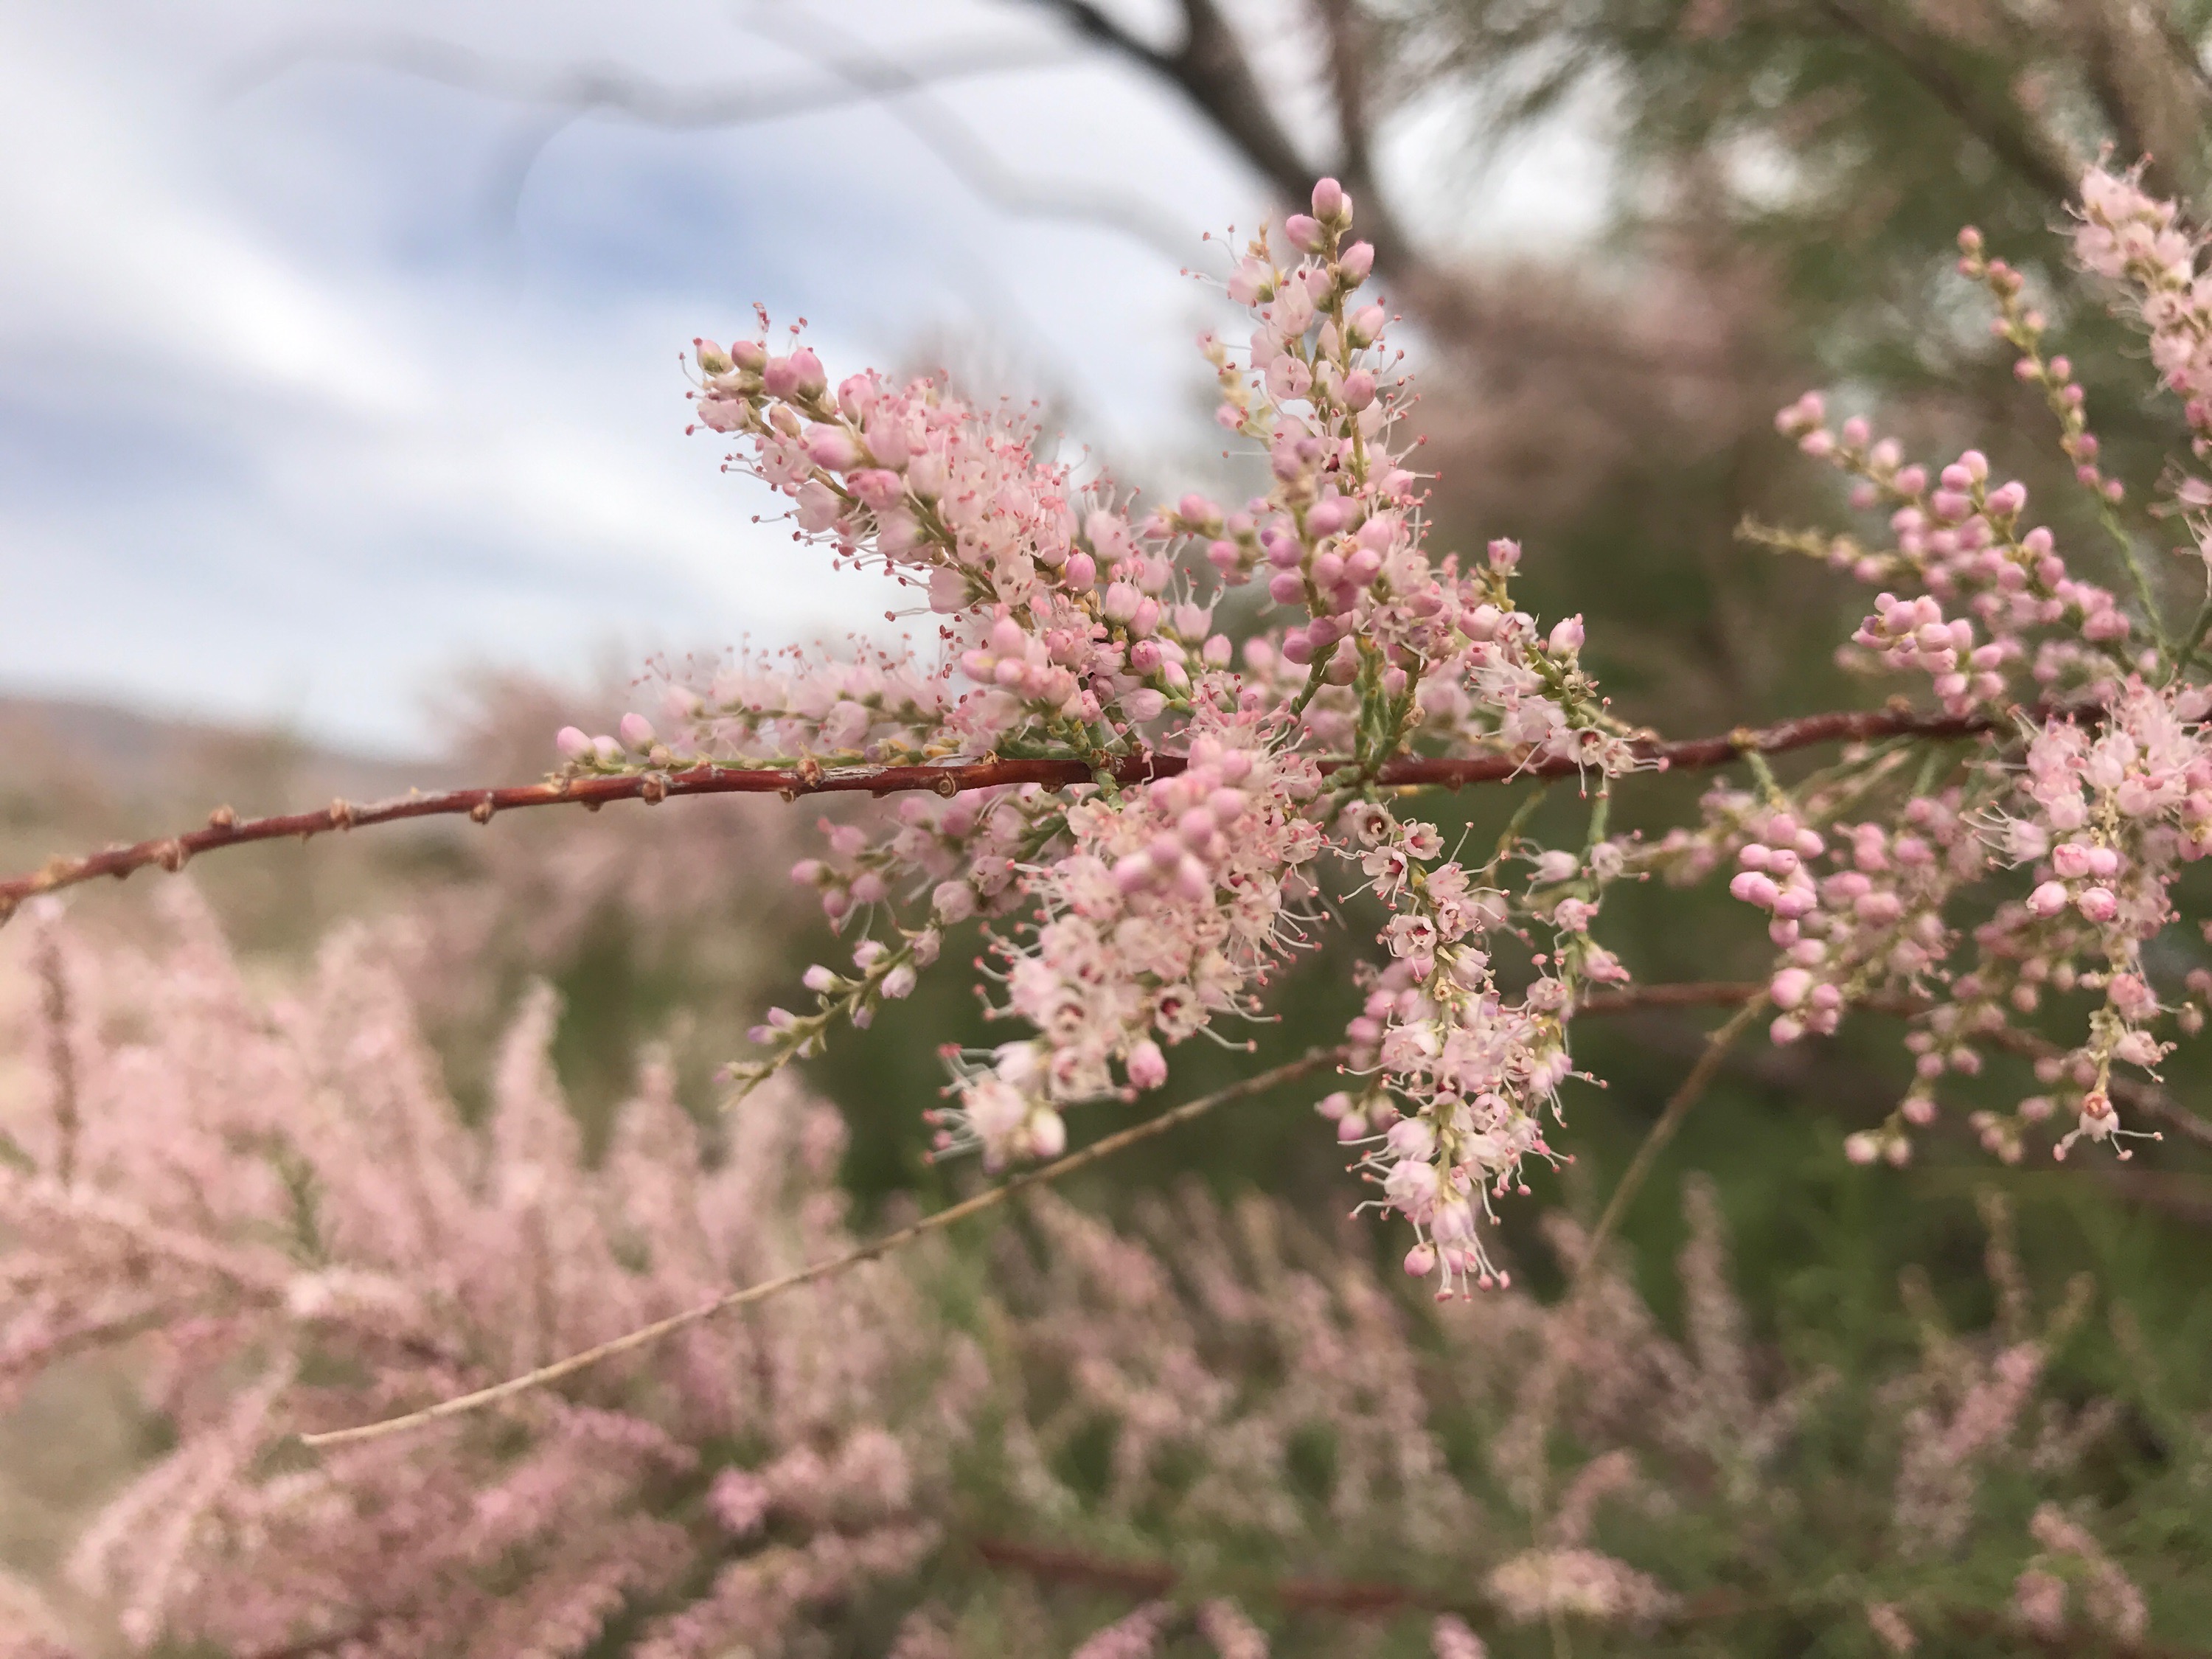 Pinkish and white blossoms, which occur on clusters along the reddish-brown twig